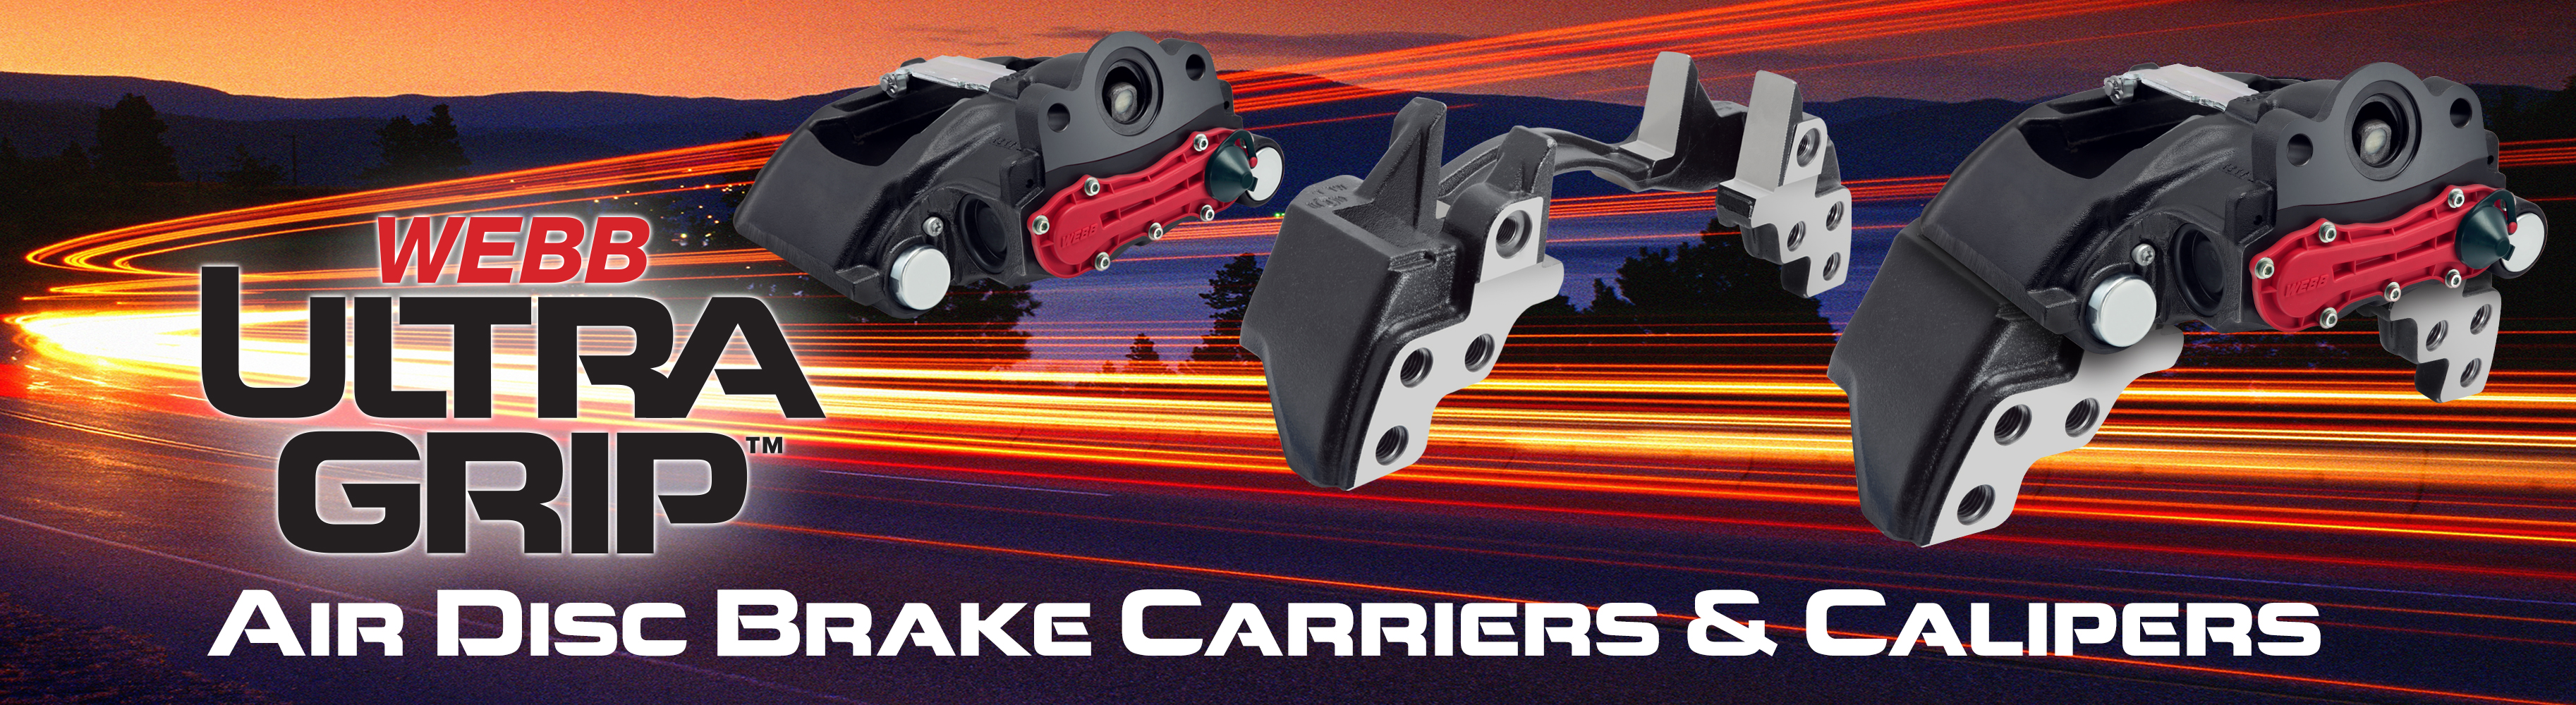 calipers and carriers